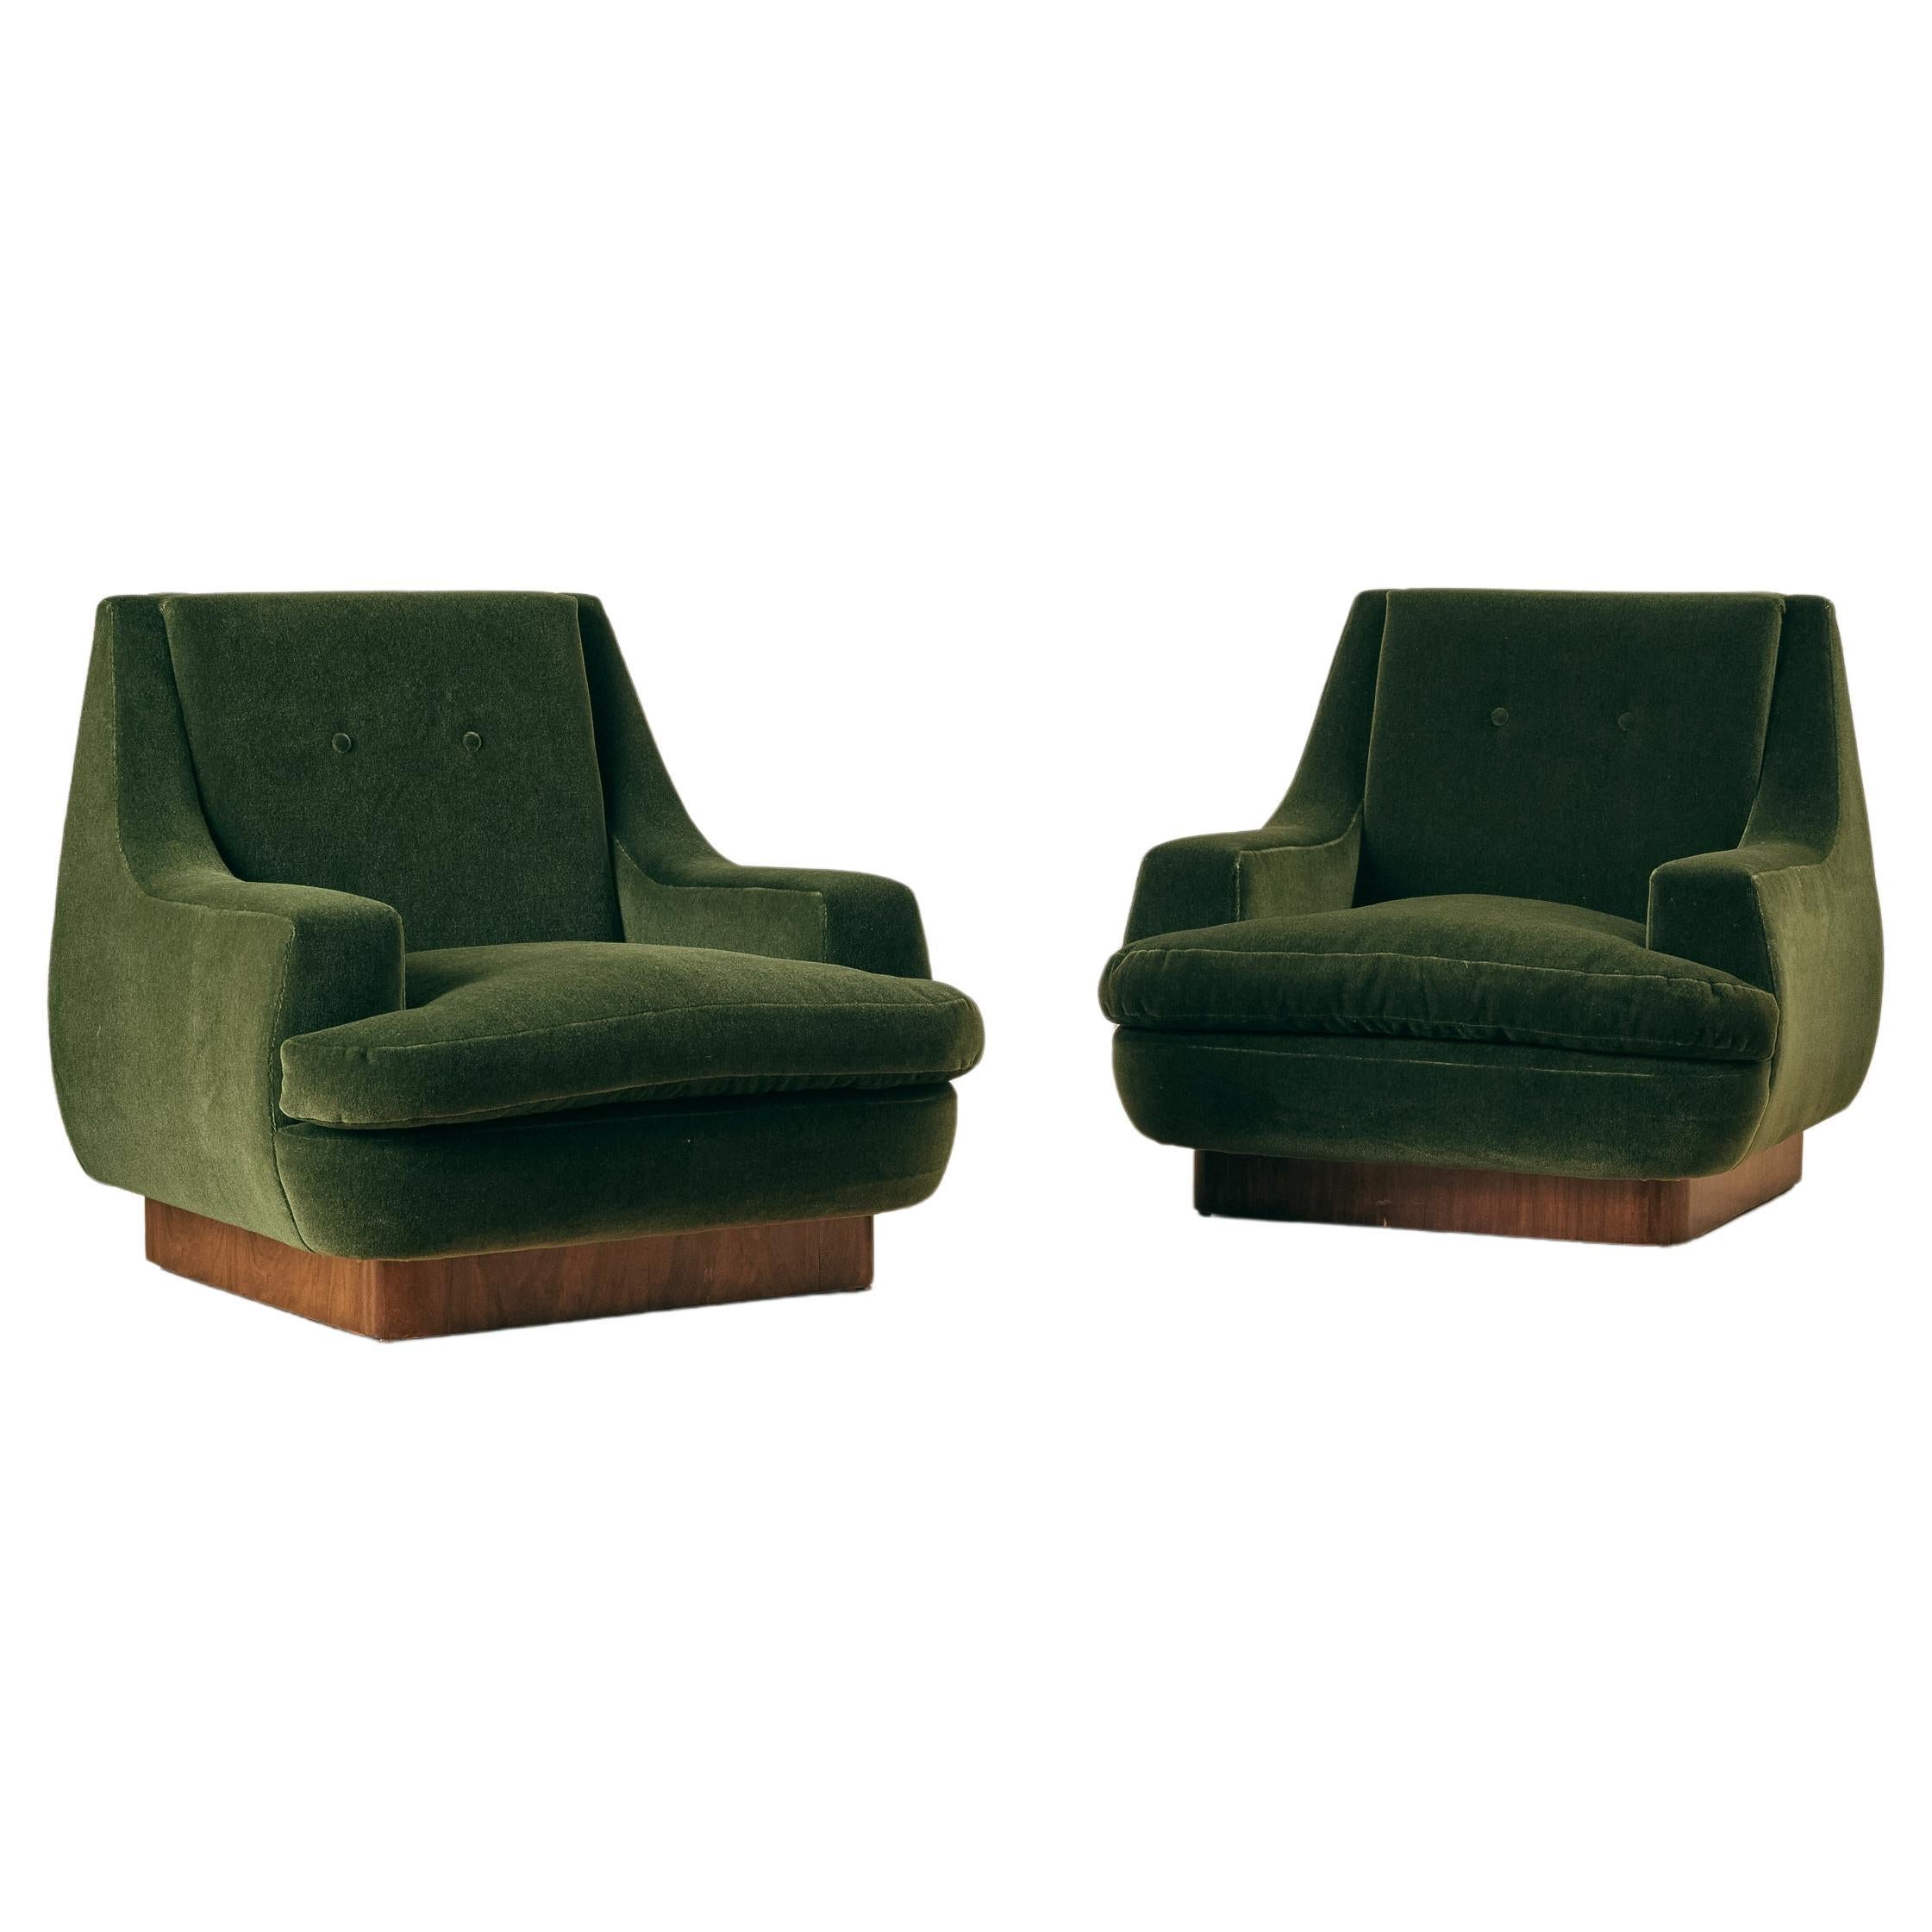 A Pair of Modernist Cube Lounge Chairs  For Sale